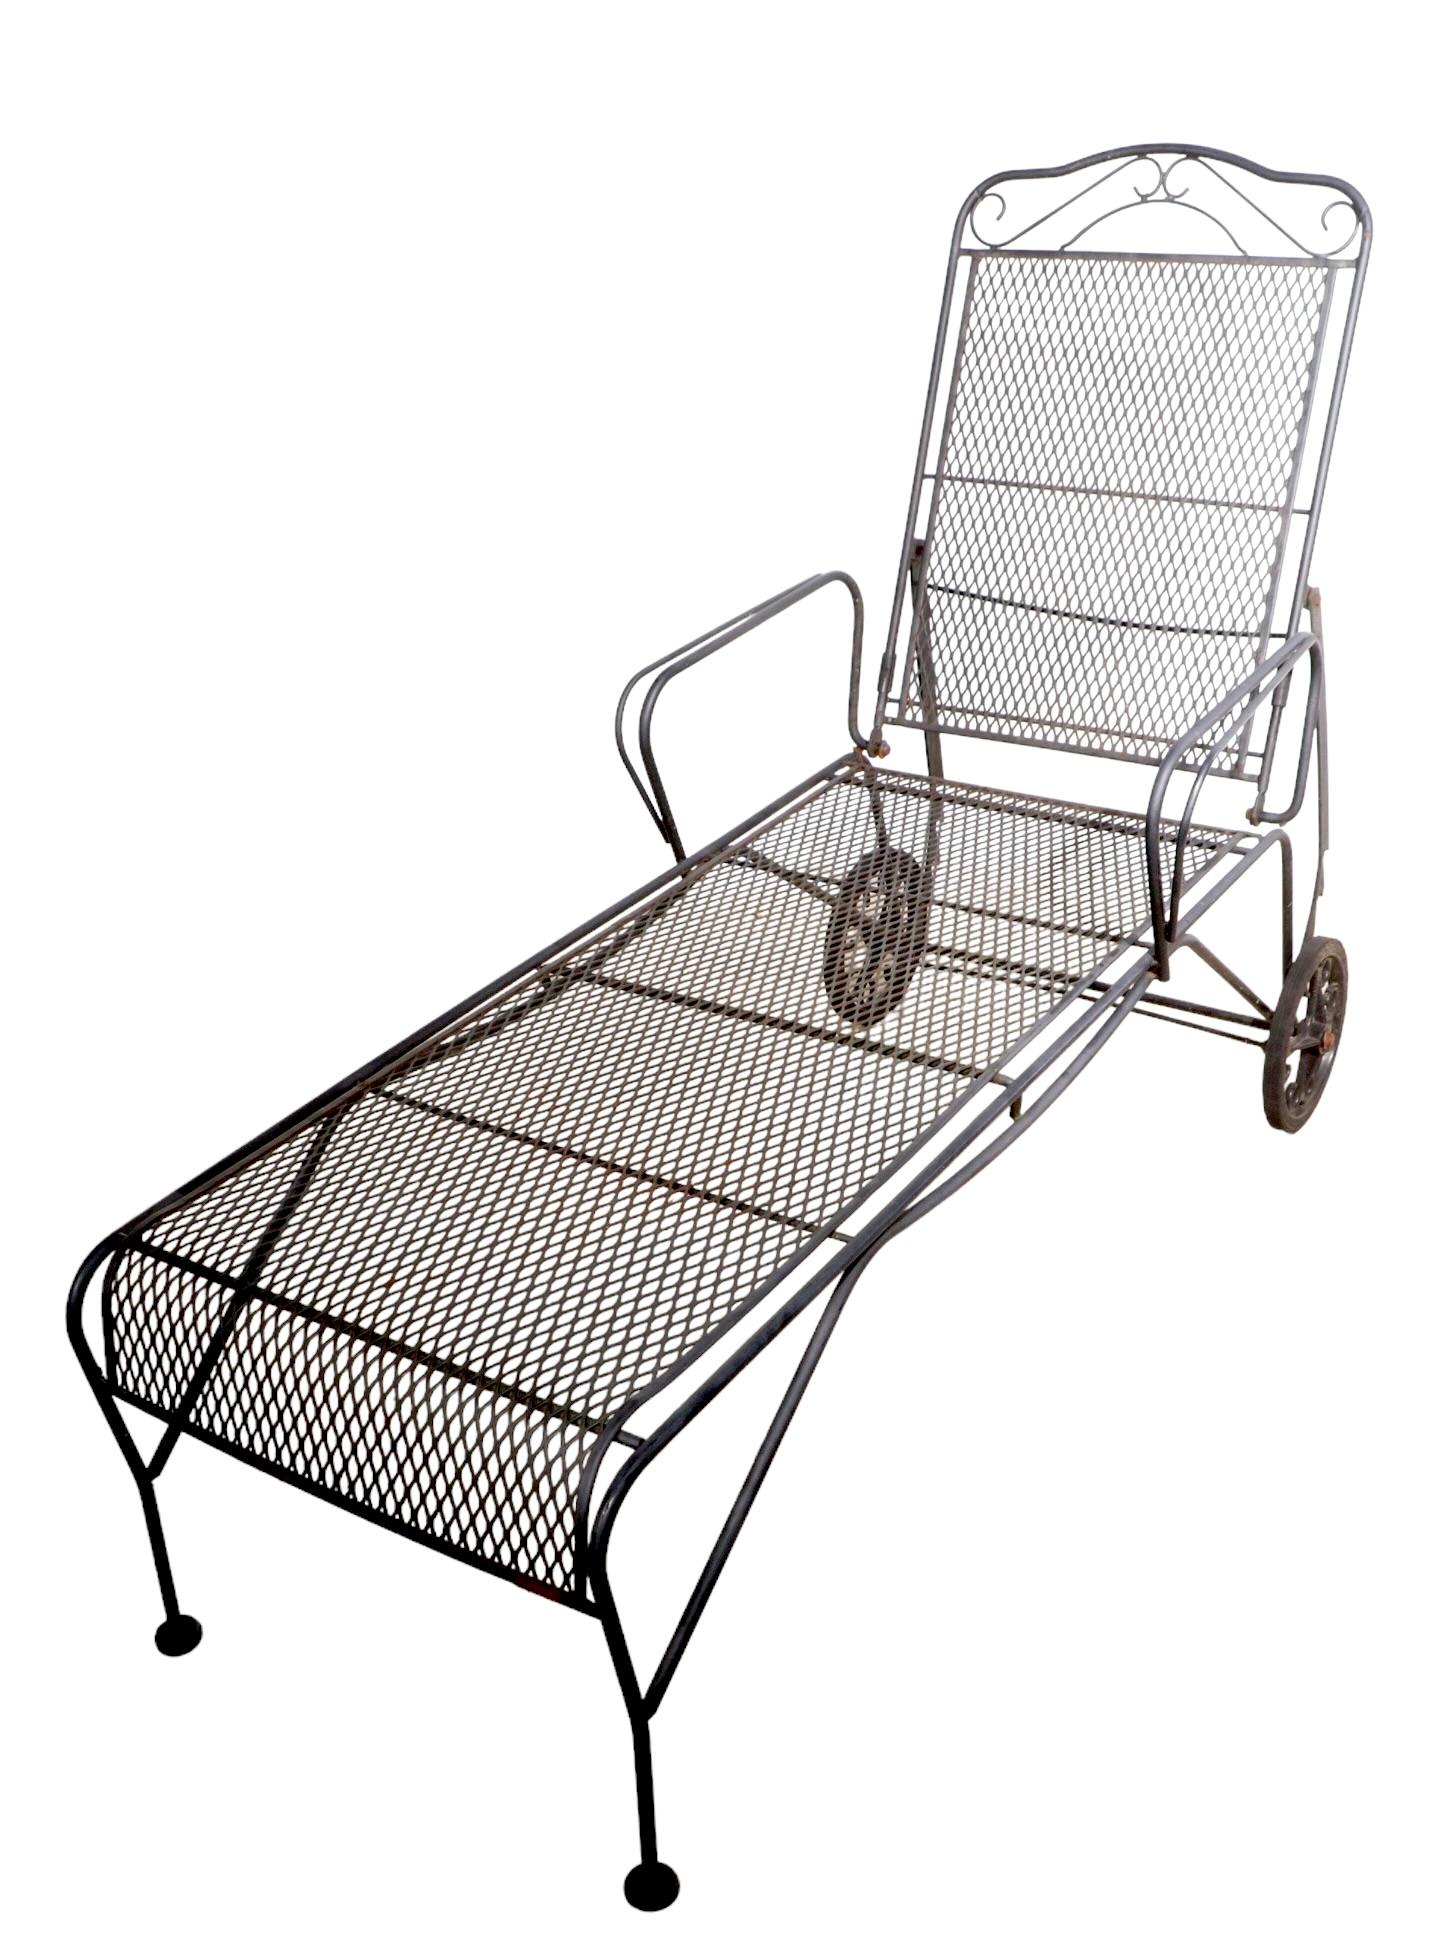 Wrought Iron Garden Patio Poolside Chaise Lounge Att. to Woodard For Sale 7